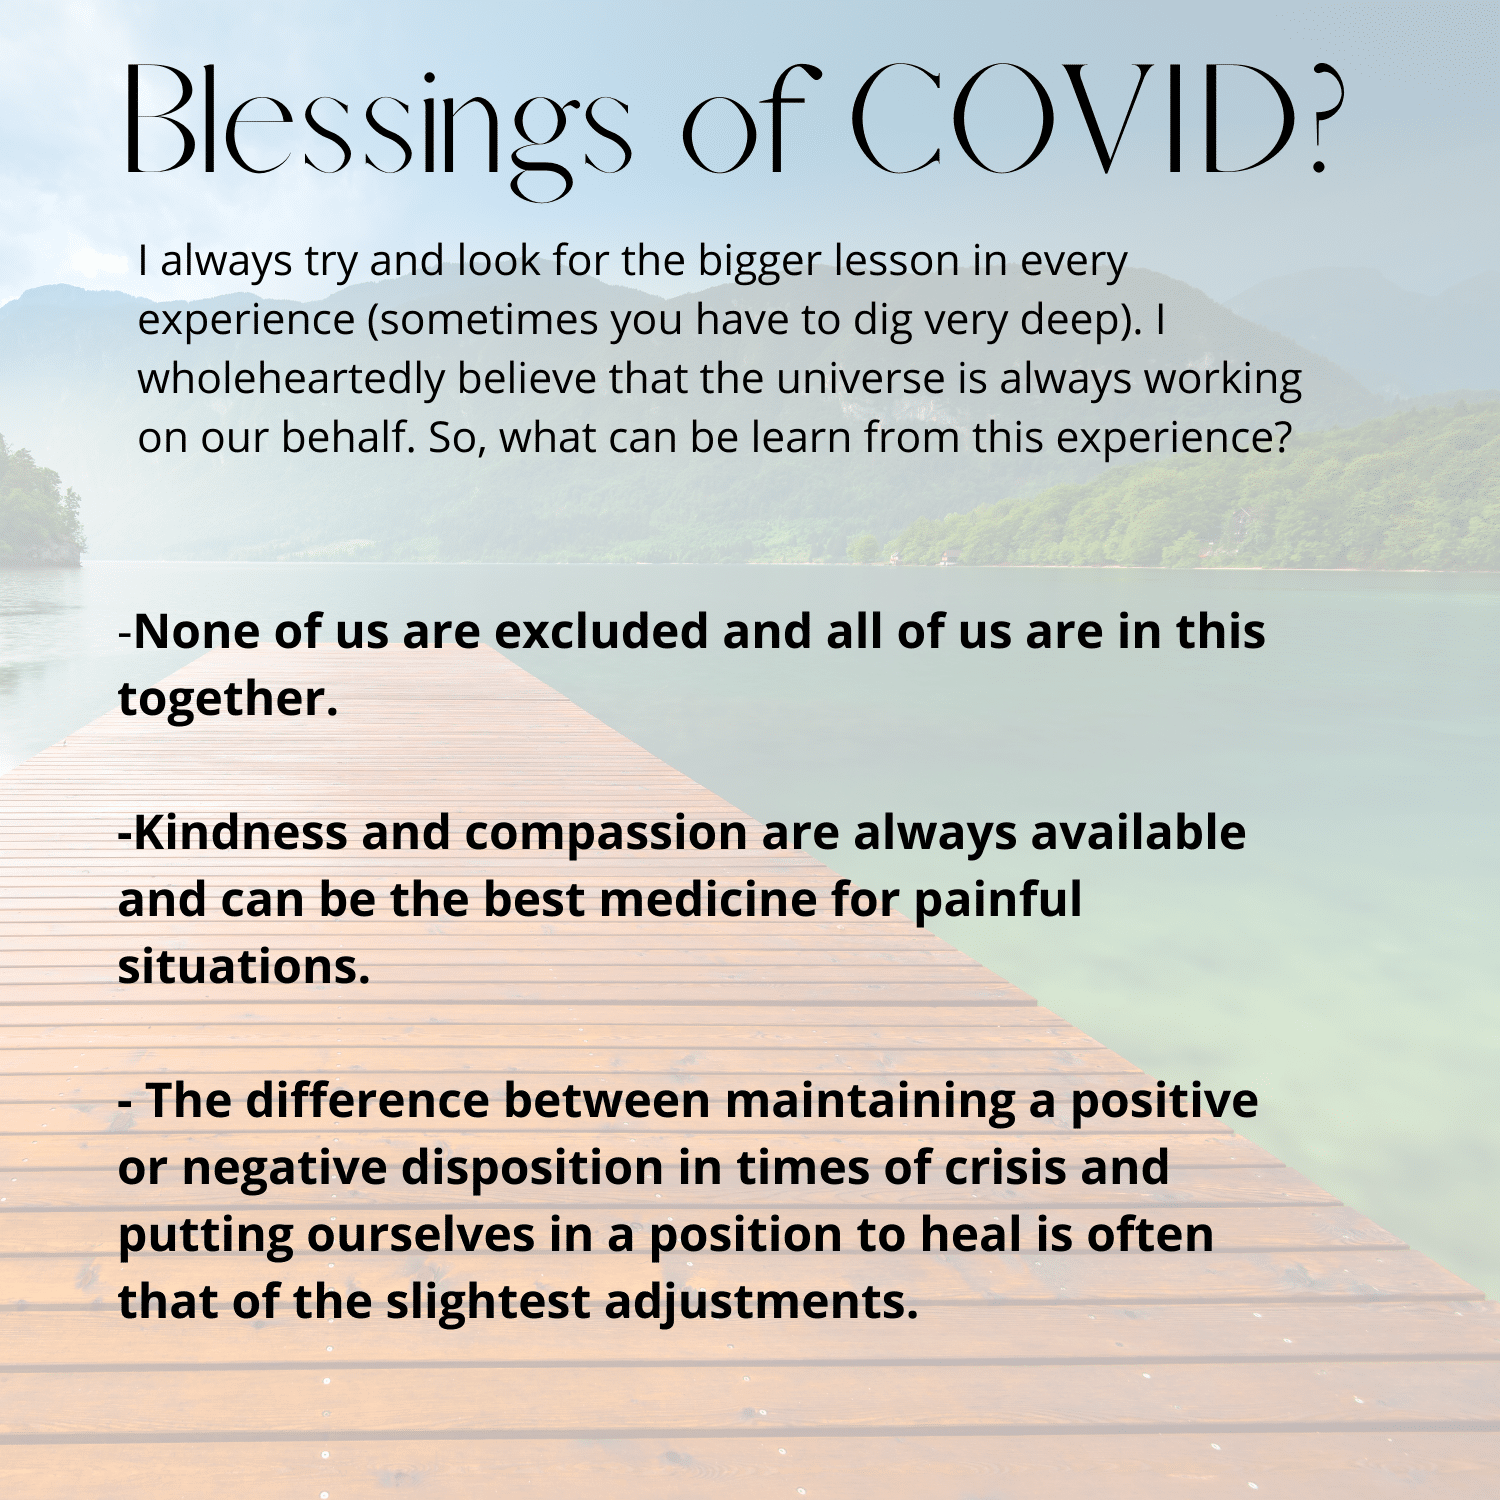 Blessings of Covid